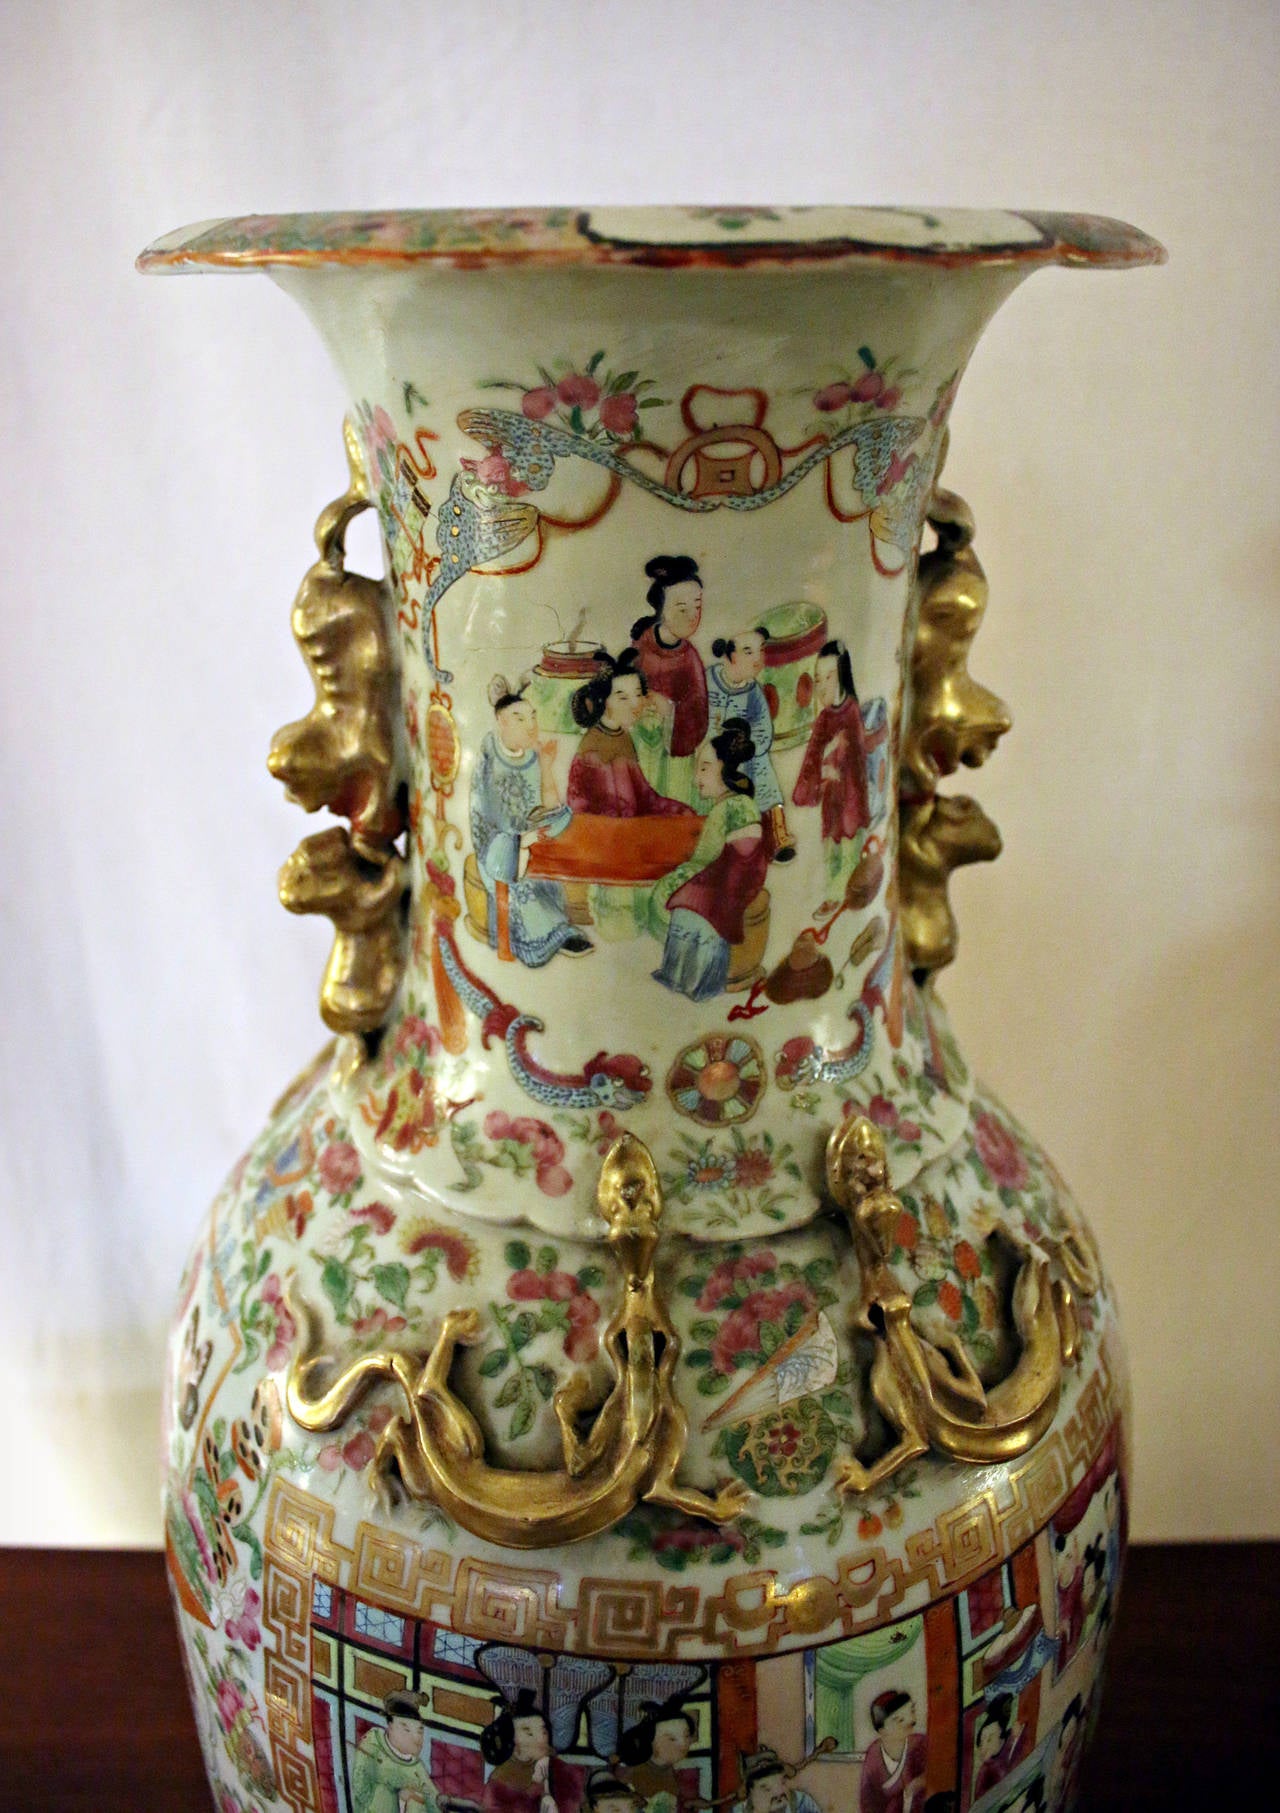 Outstanding matched pair of monumental sized Chinese export temple vases in the Mandarin pattern. Heavily decorated with scenes of colorful figures accented with flowers and insects. There are four gold dragons on the sides of each vase as well as